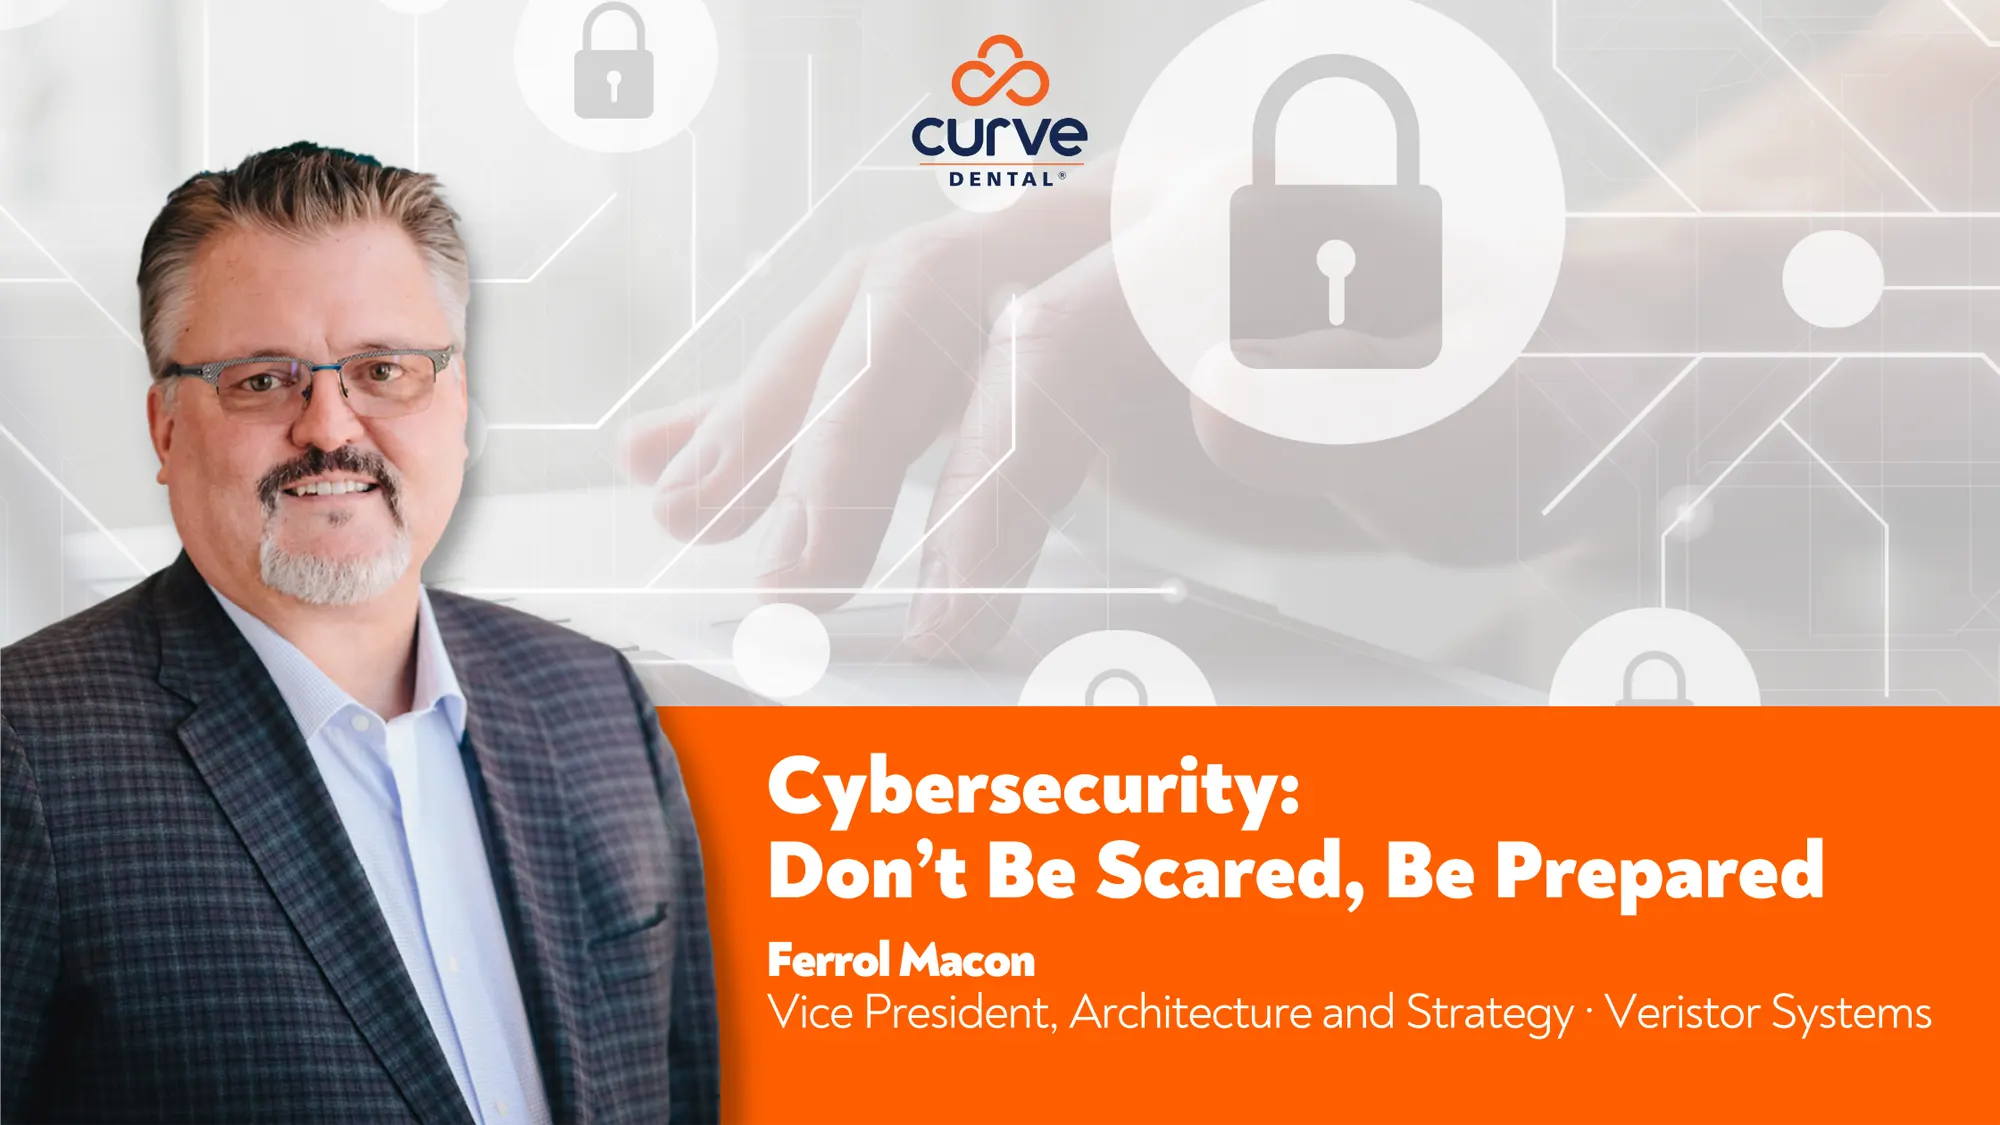 Cybersecurity: Don’t Be Scared, Be Prepared